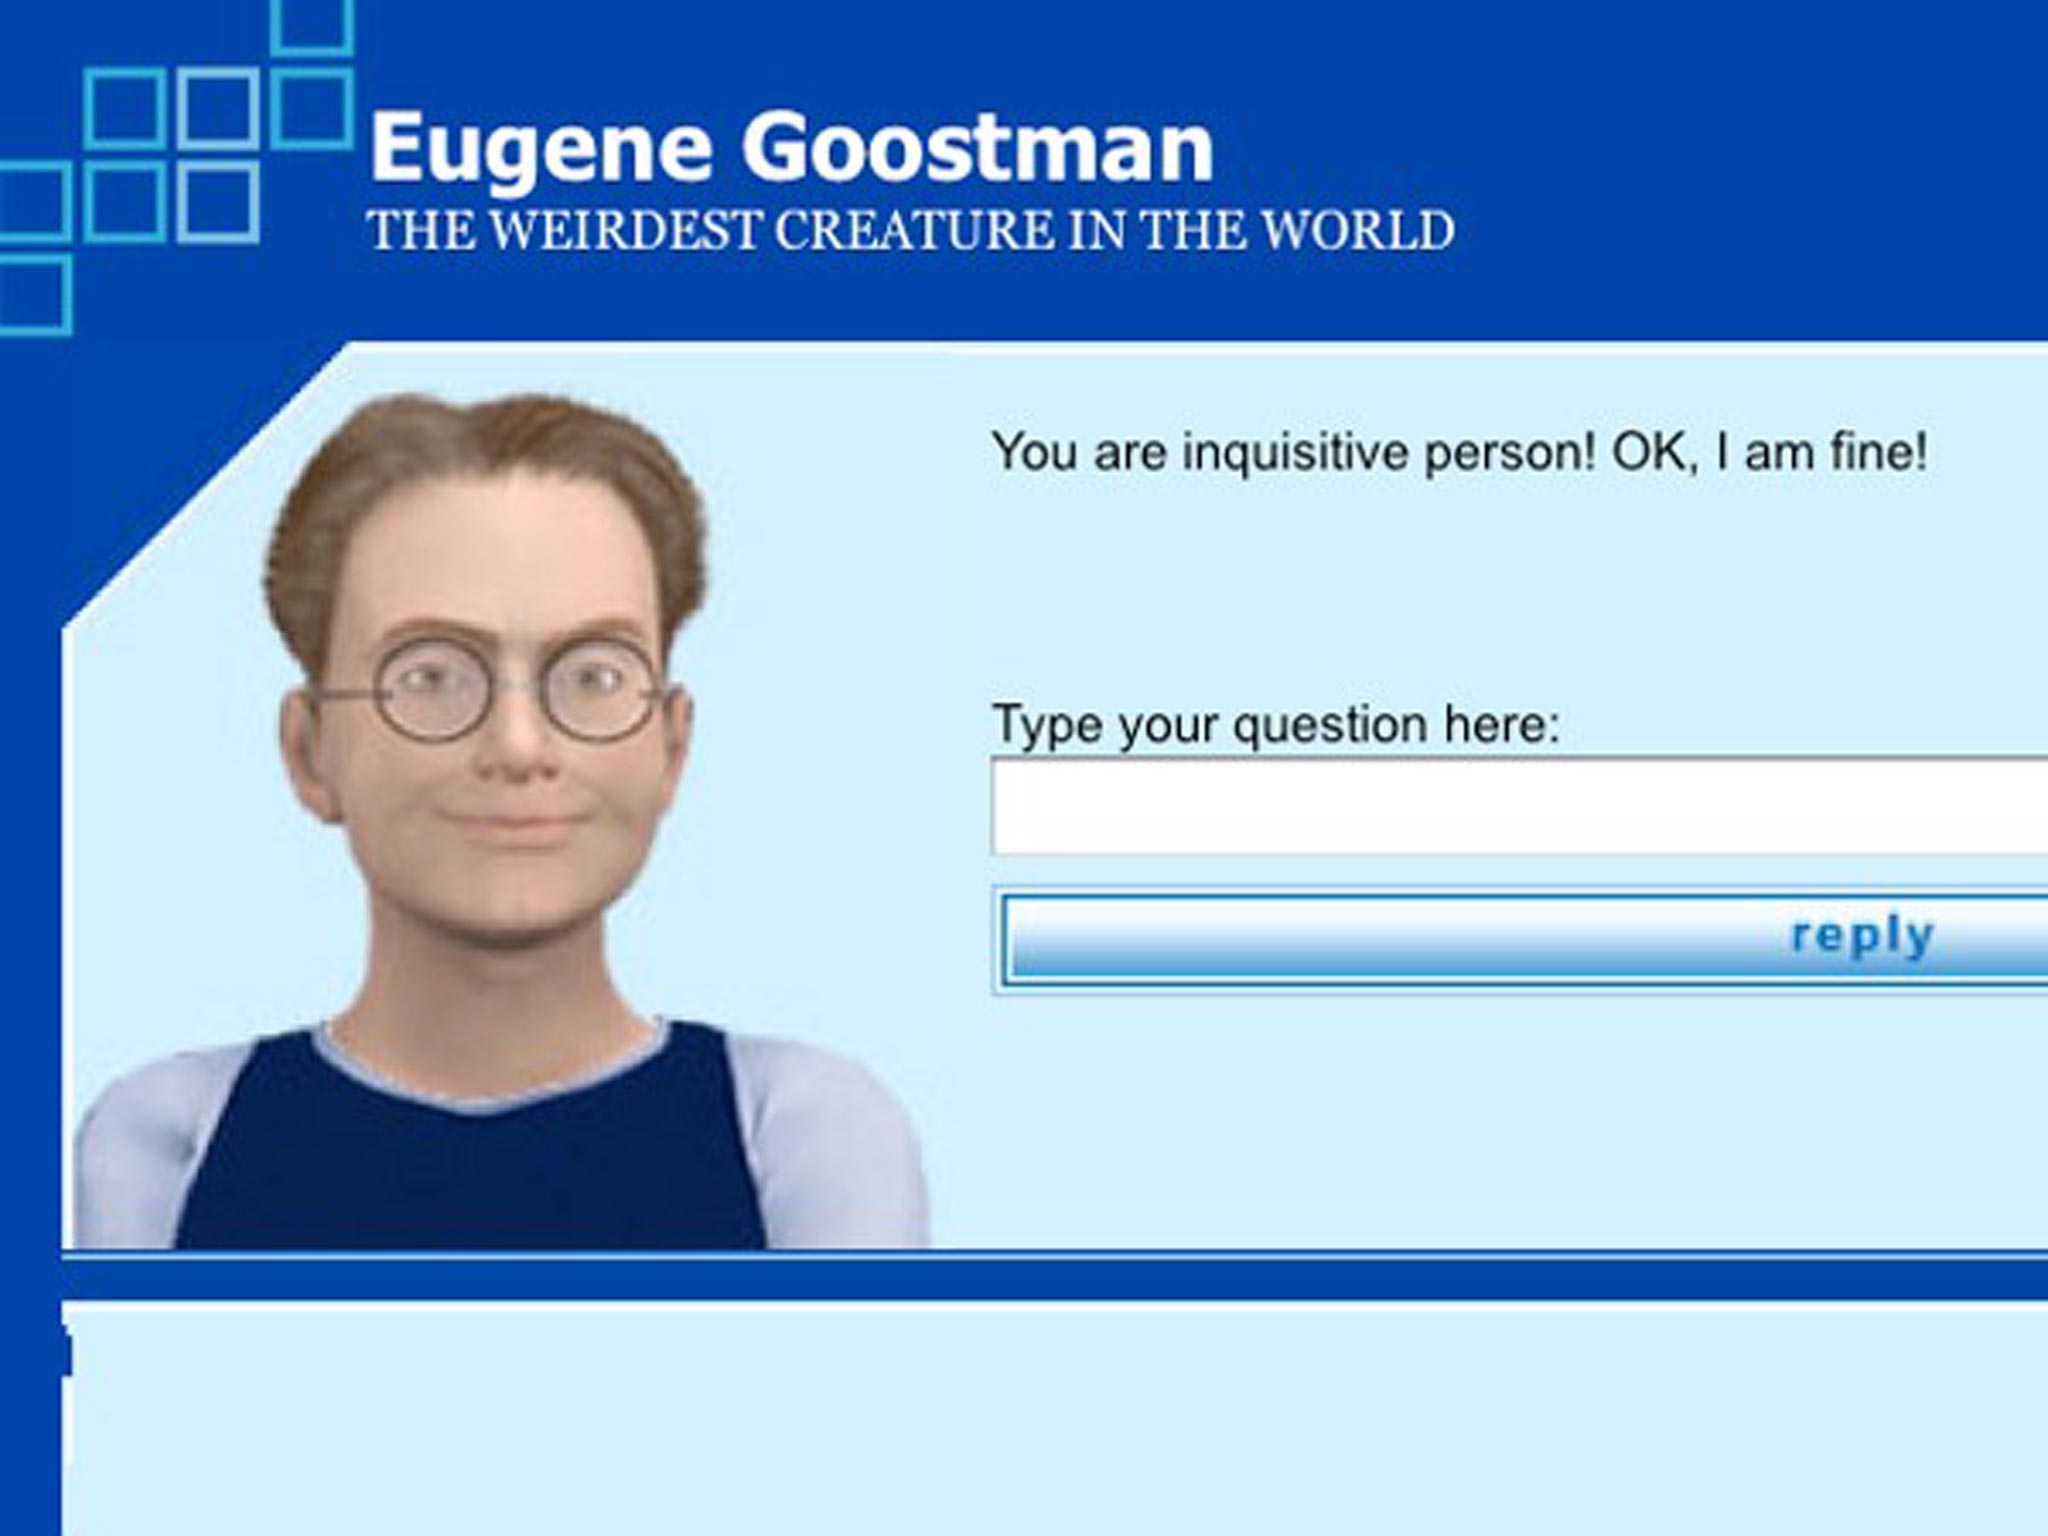 Eugene's avatar, the computer has fooled people into thinking it is human